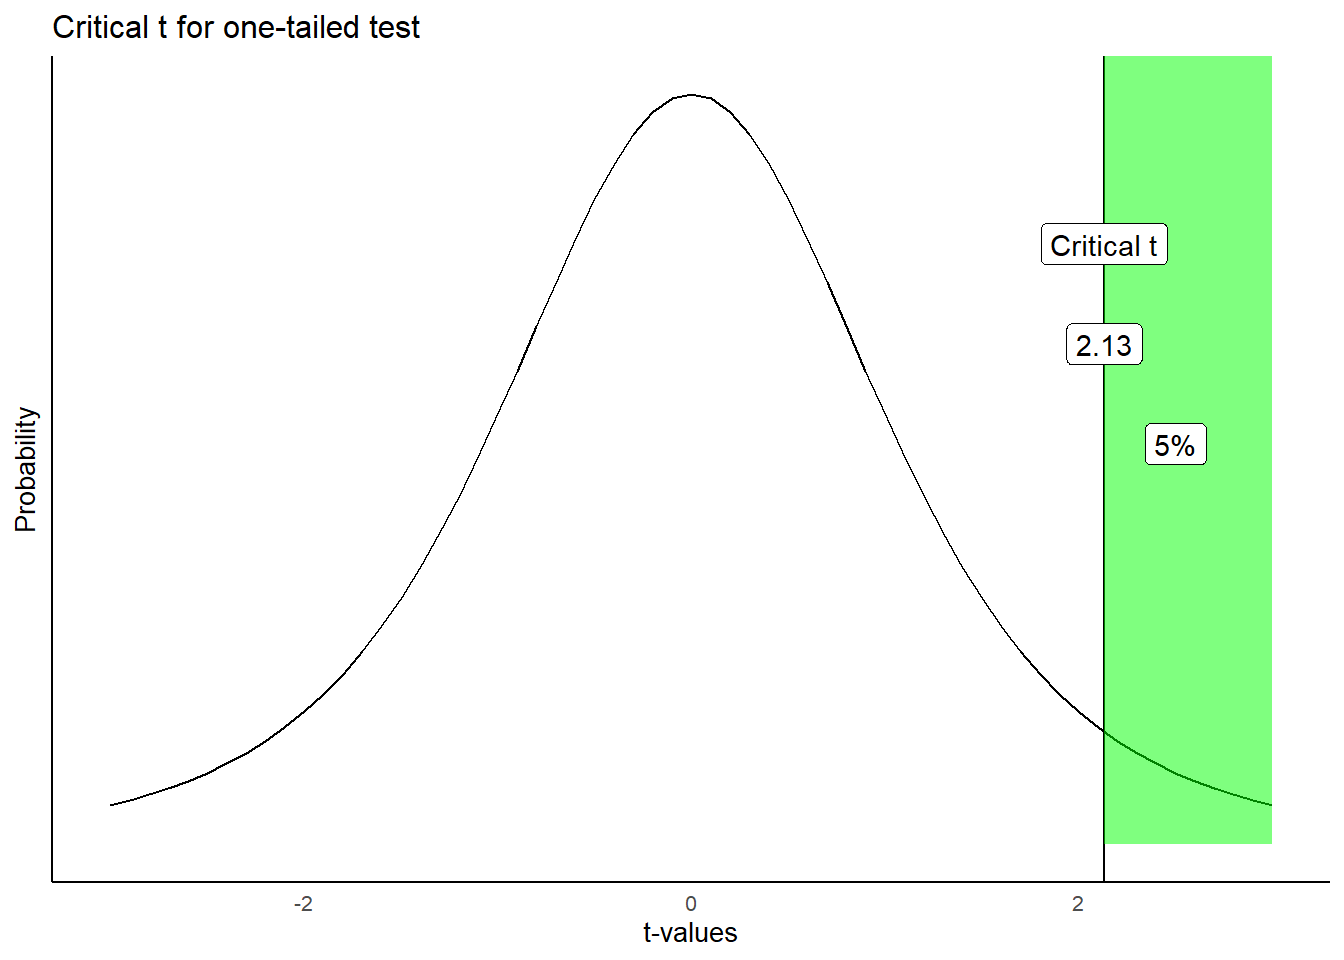 The critical value of t for an alpha criterion of 0.05. 5% of all ts are at this value or larger